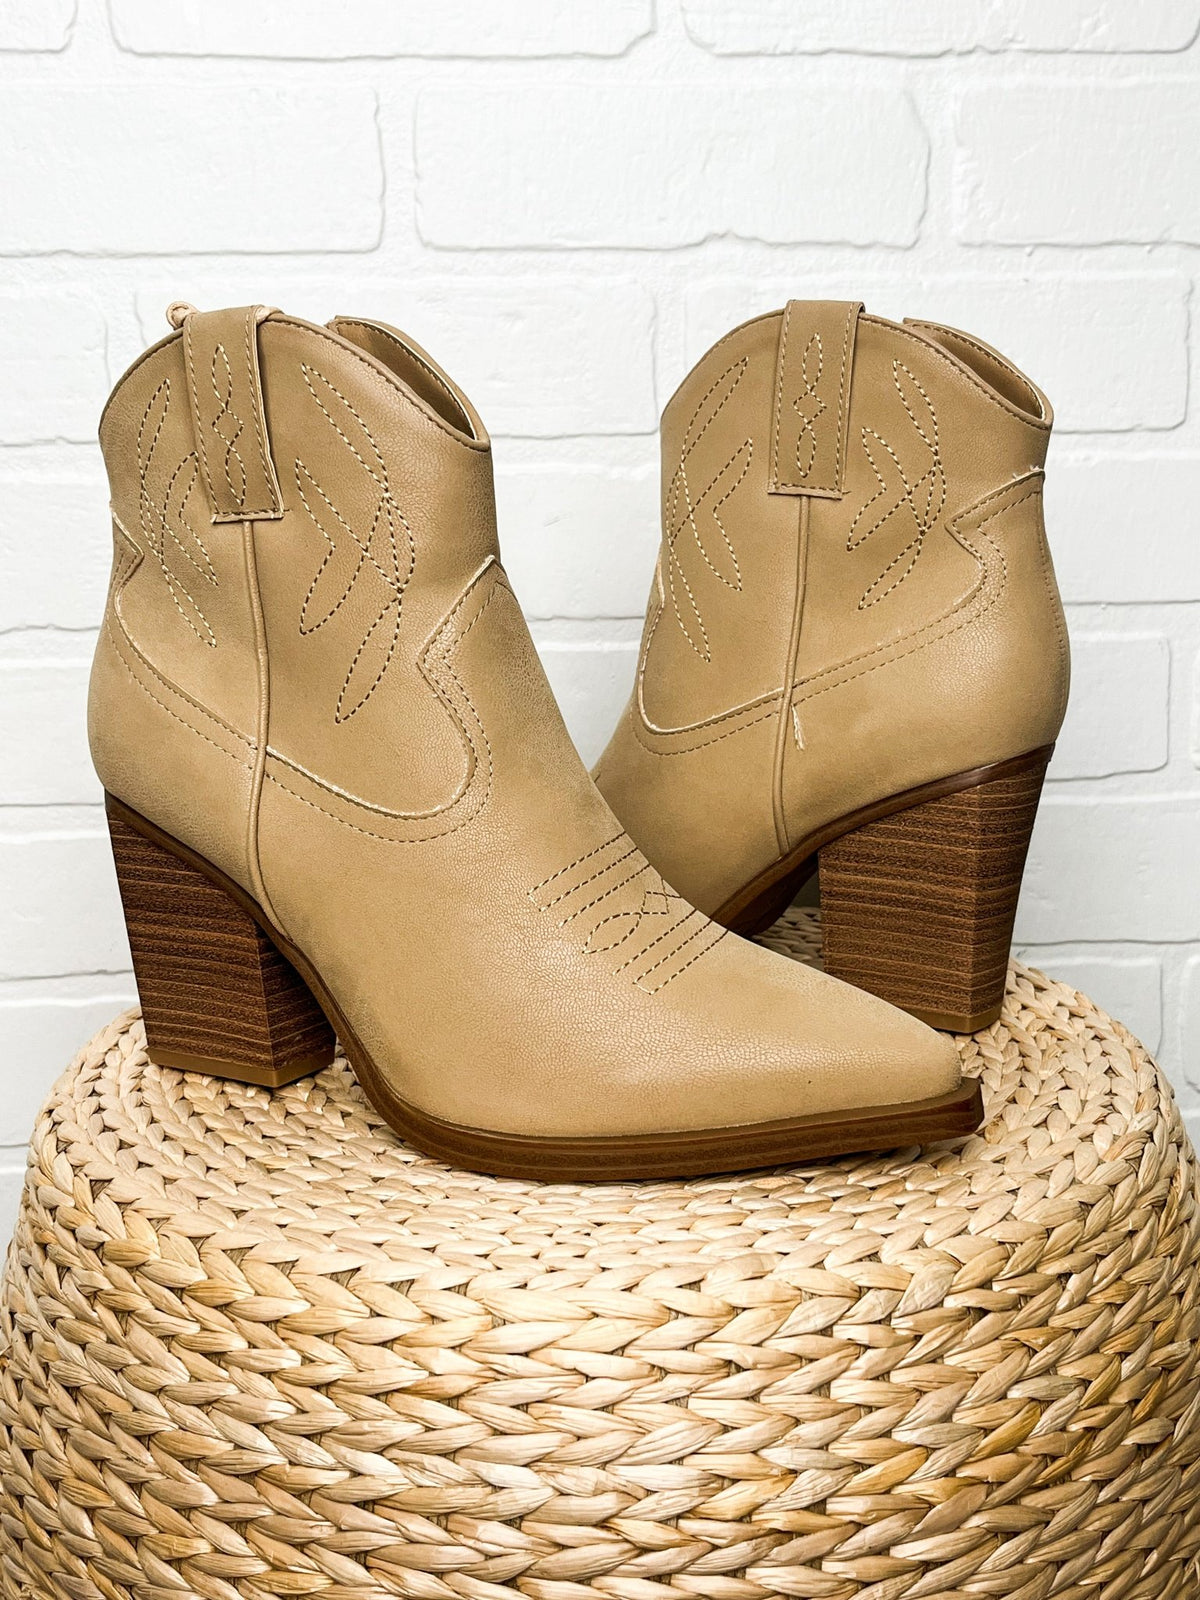 Sawyer ankle cowboy boots natural - Cute boots - Trendy Shoes at Lush Fashion Lounge Boutique in Oklahoma City